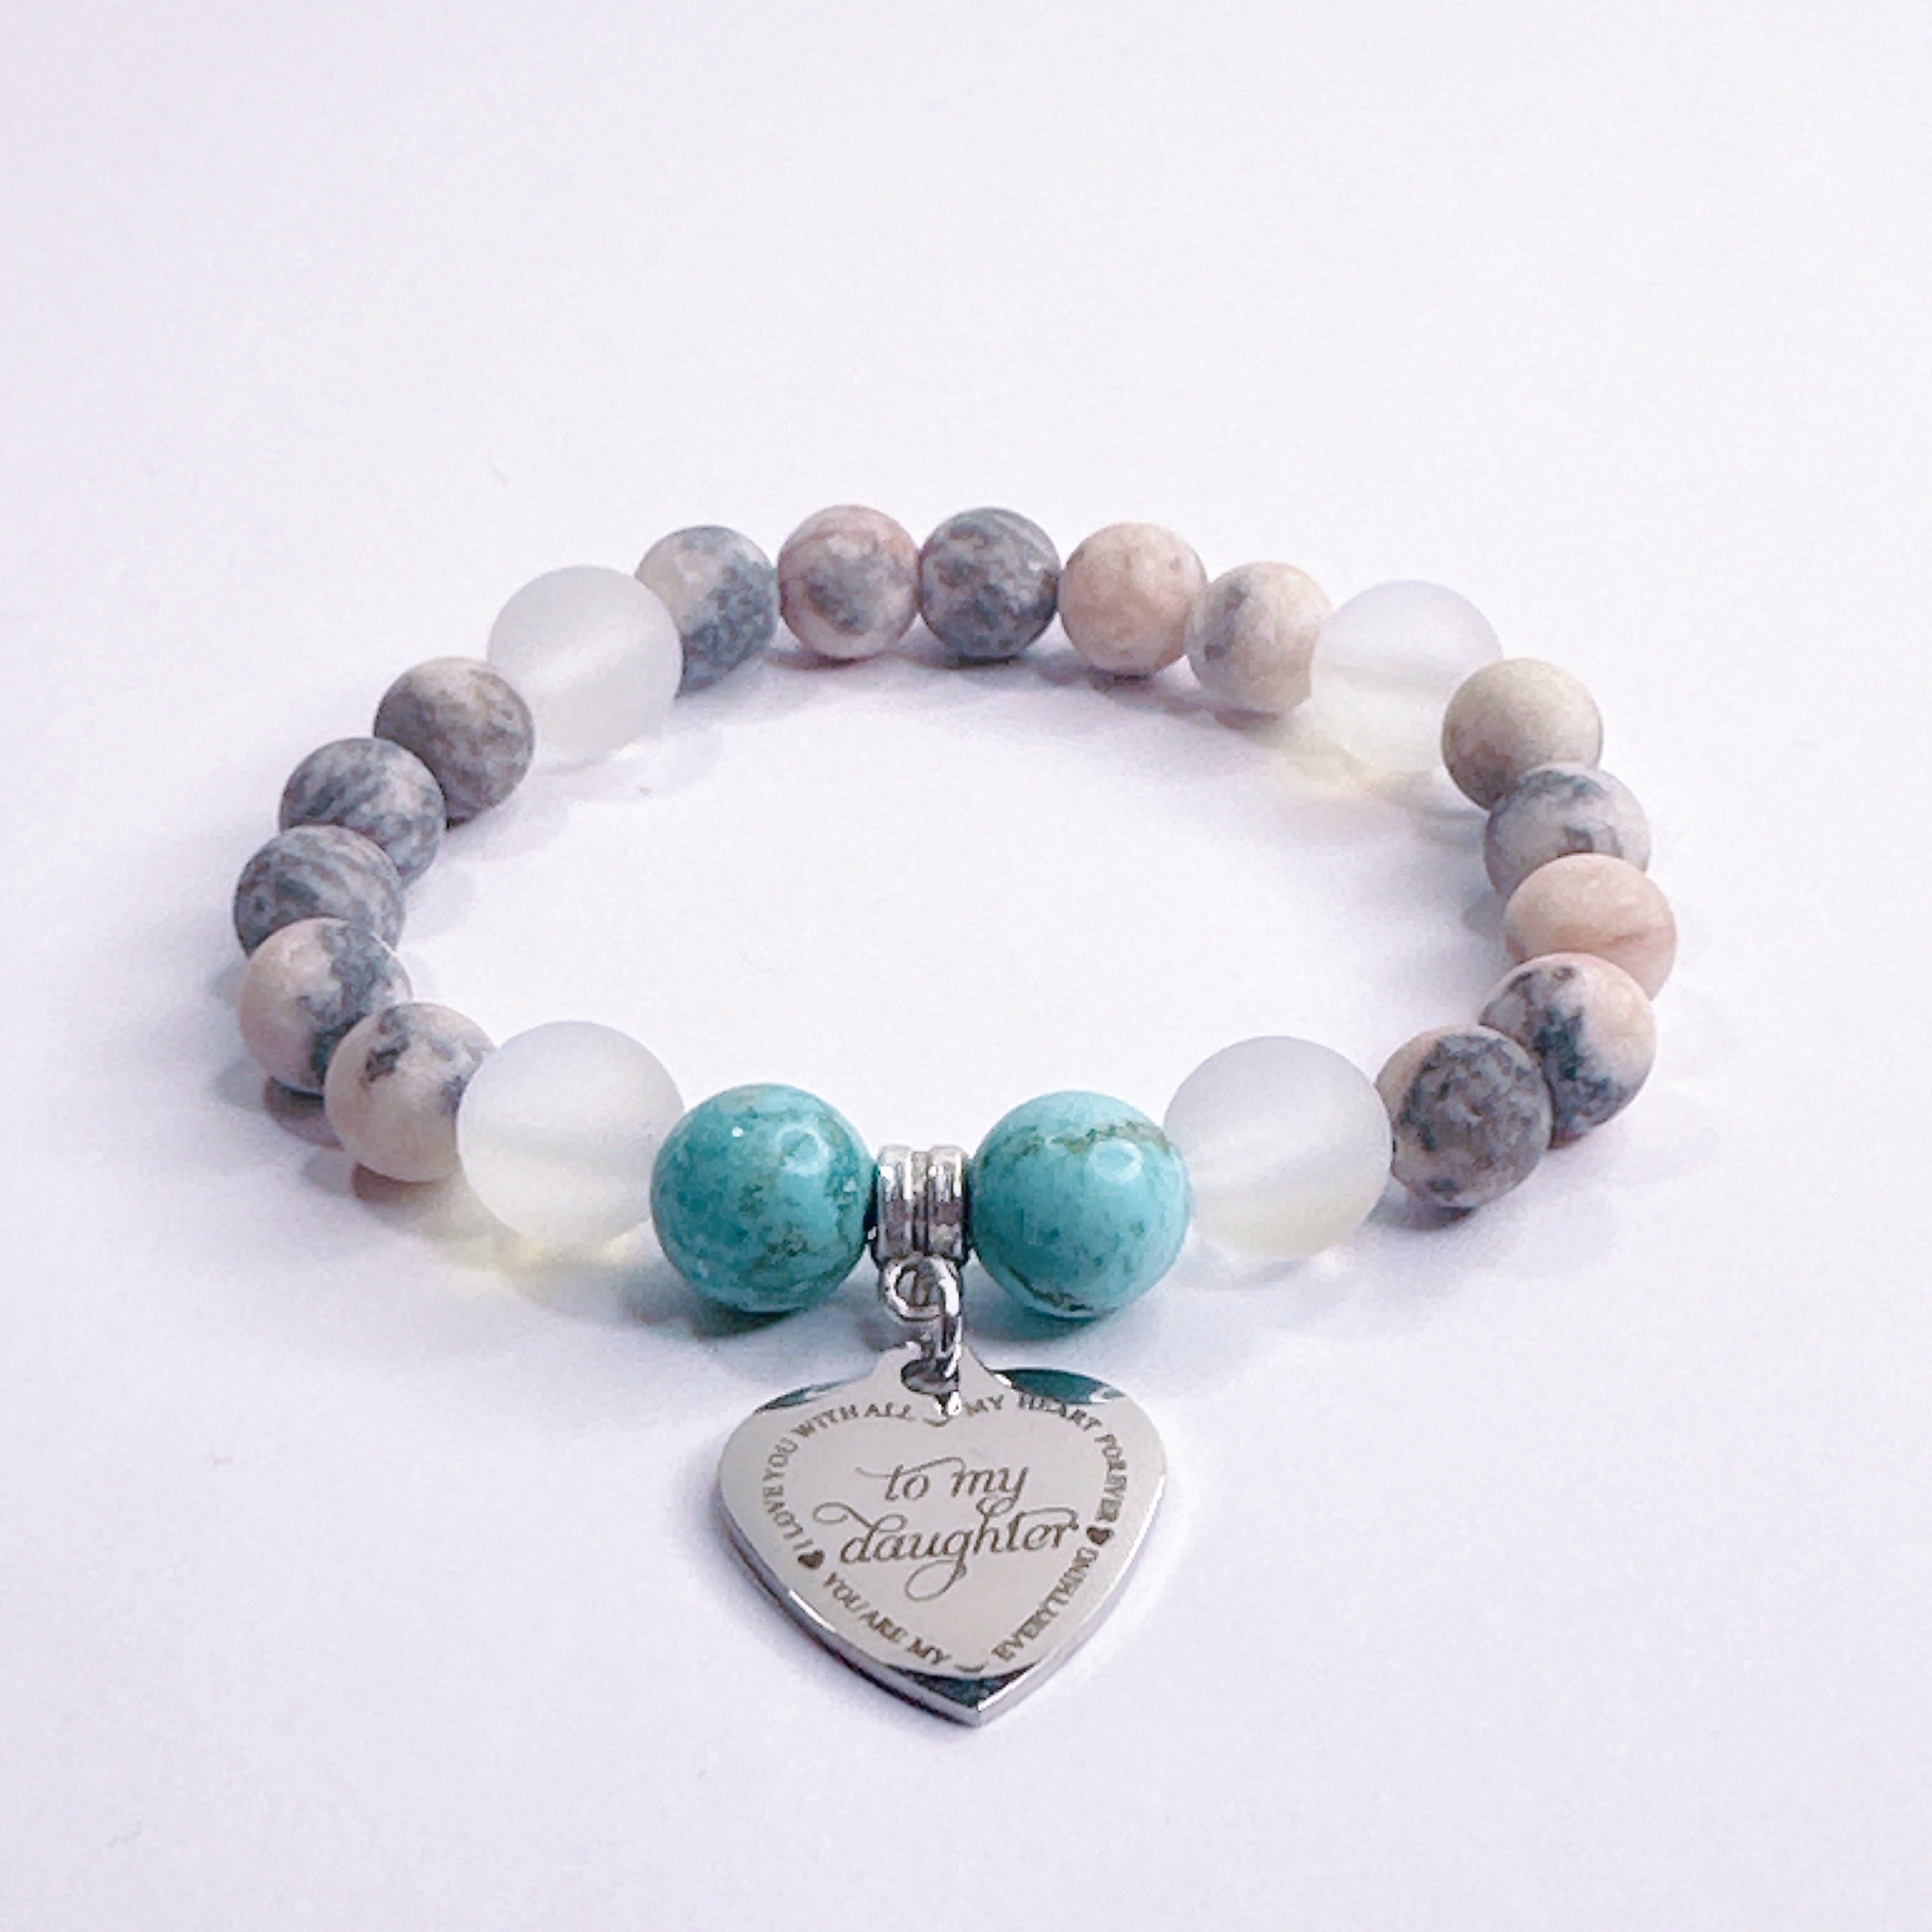 To my Daughter Charm Bracelet Turquoise